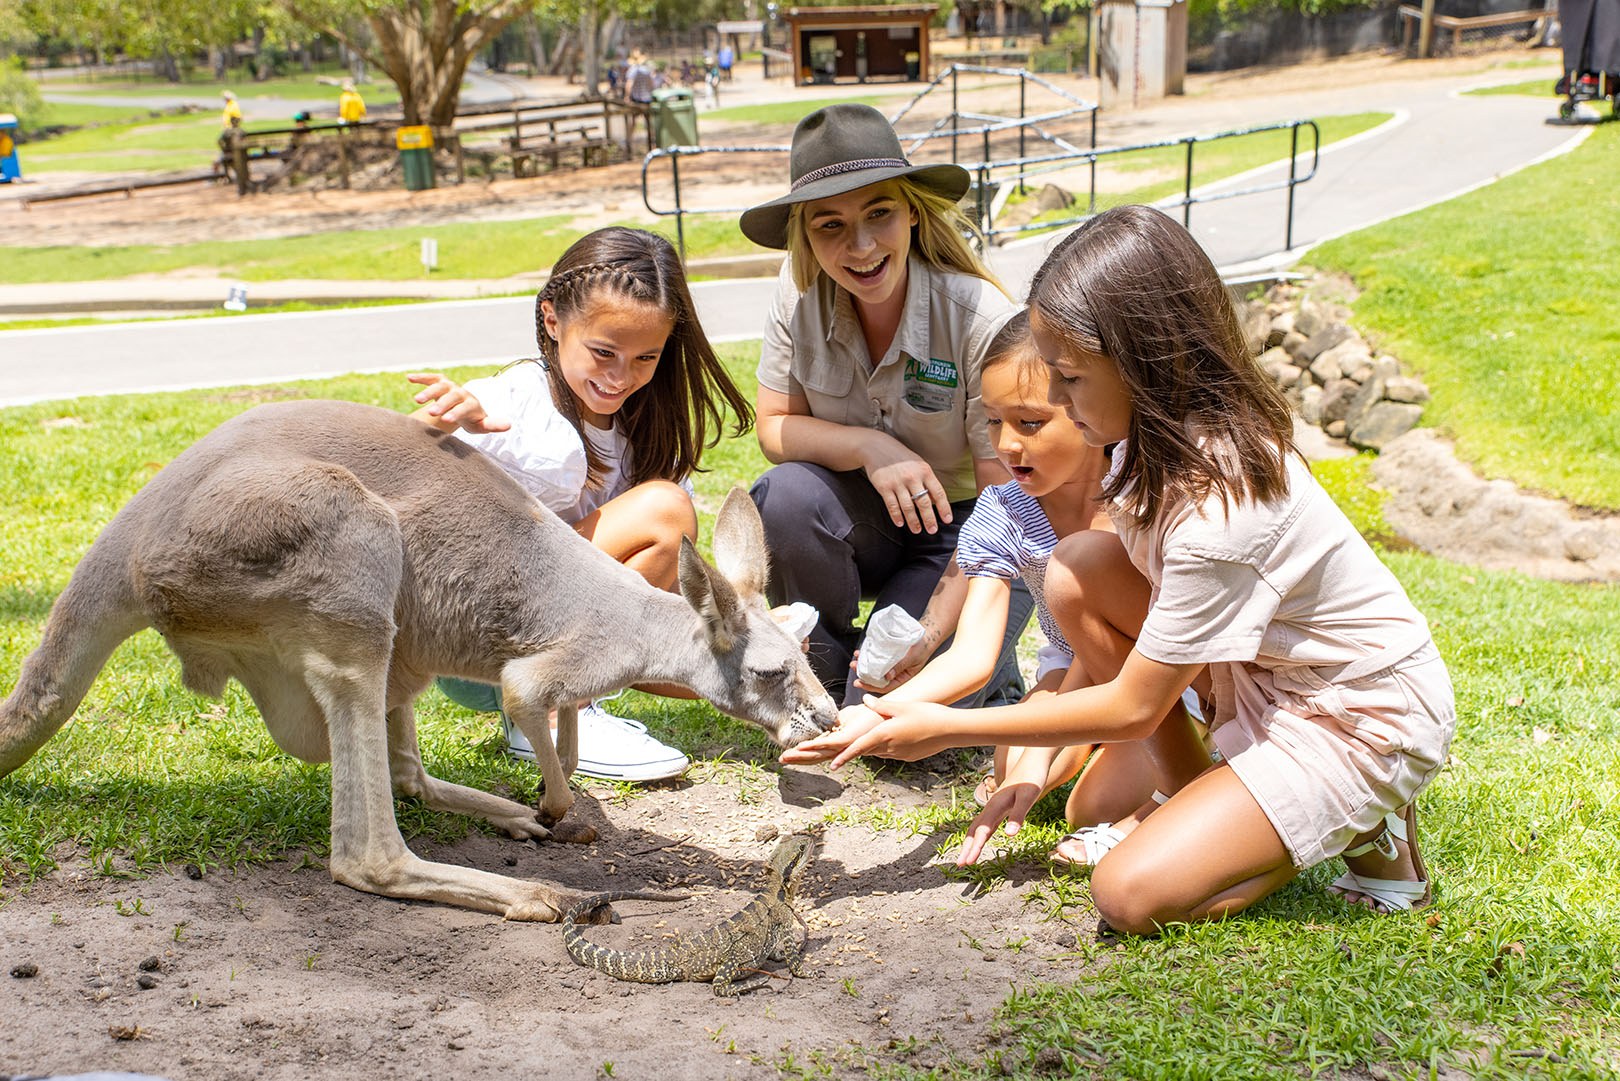 Three young girls feeding a kangaroo at Currumbin Wildlife Sanctuary with a staff member.